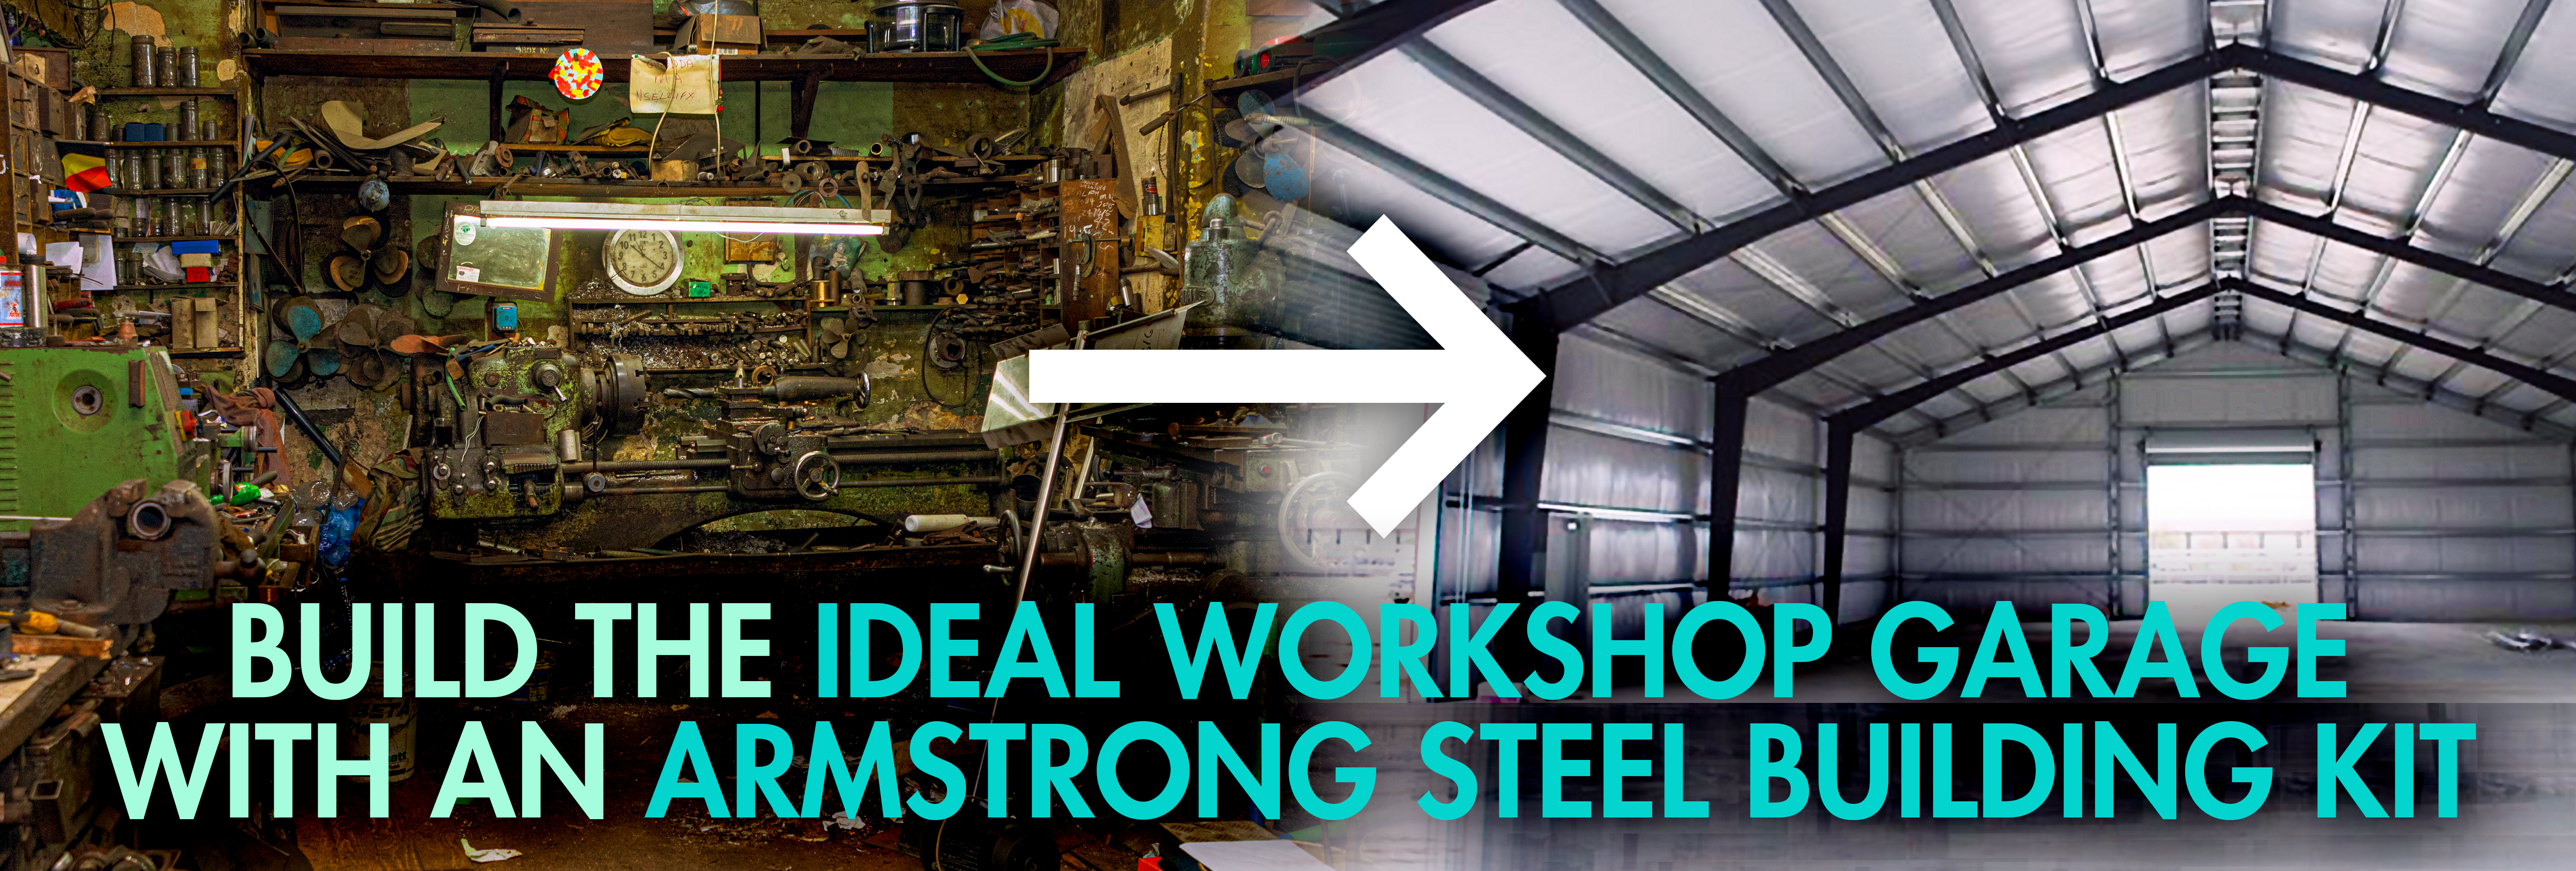 The Smart Investment: Why Steel Buildings Are Perfect for Your Workshop Garage